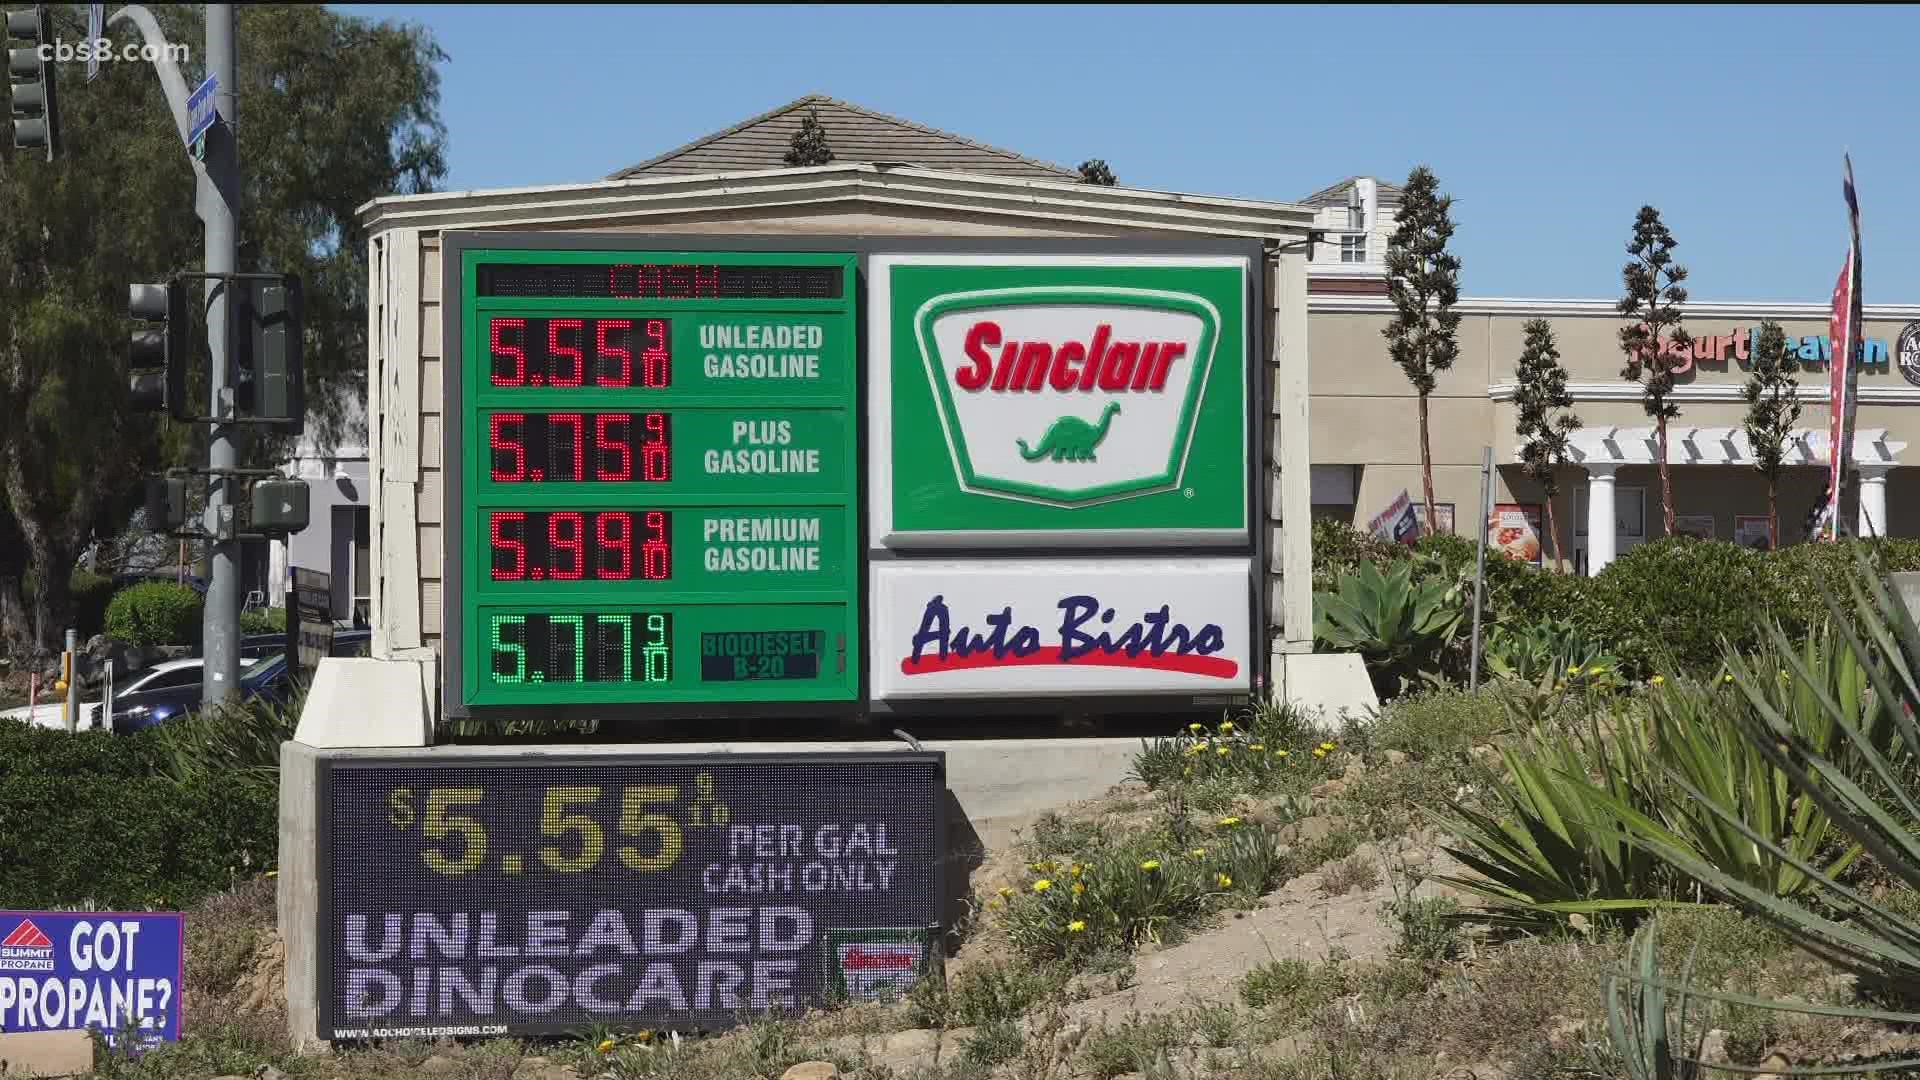 CBS 8 found a station in Scripps Ranch that is charging an extra 40 cents a gallon.